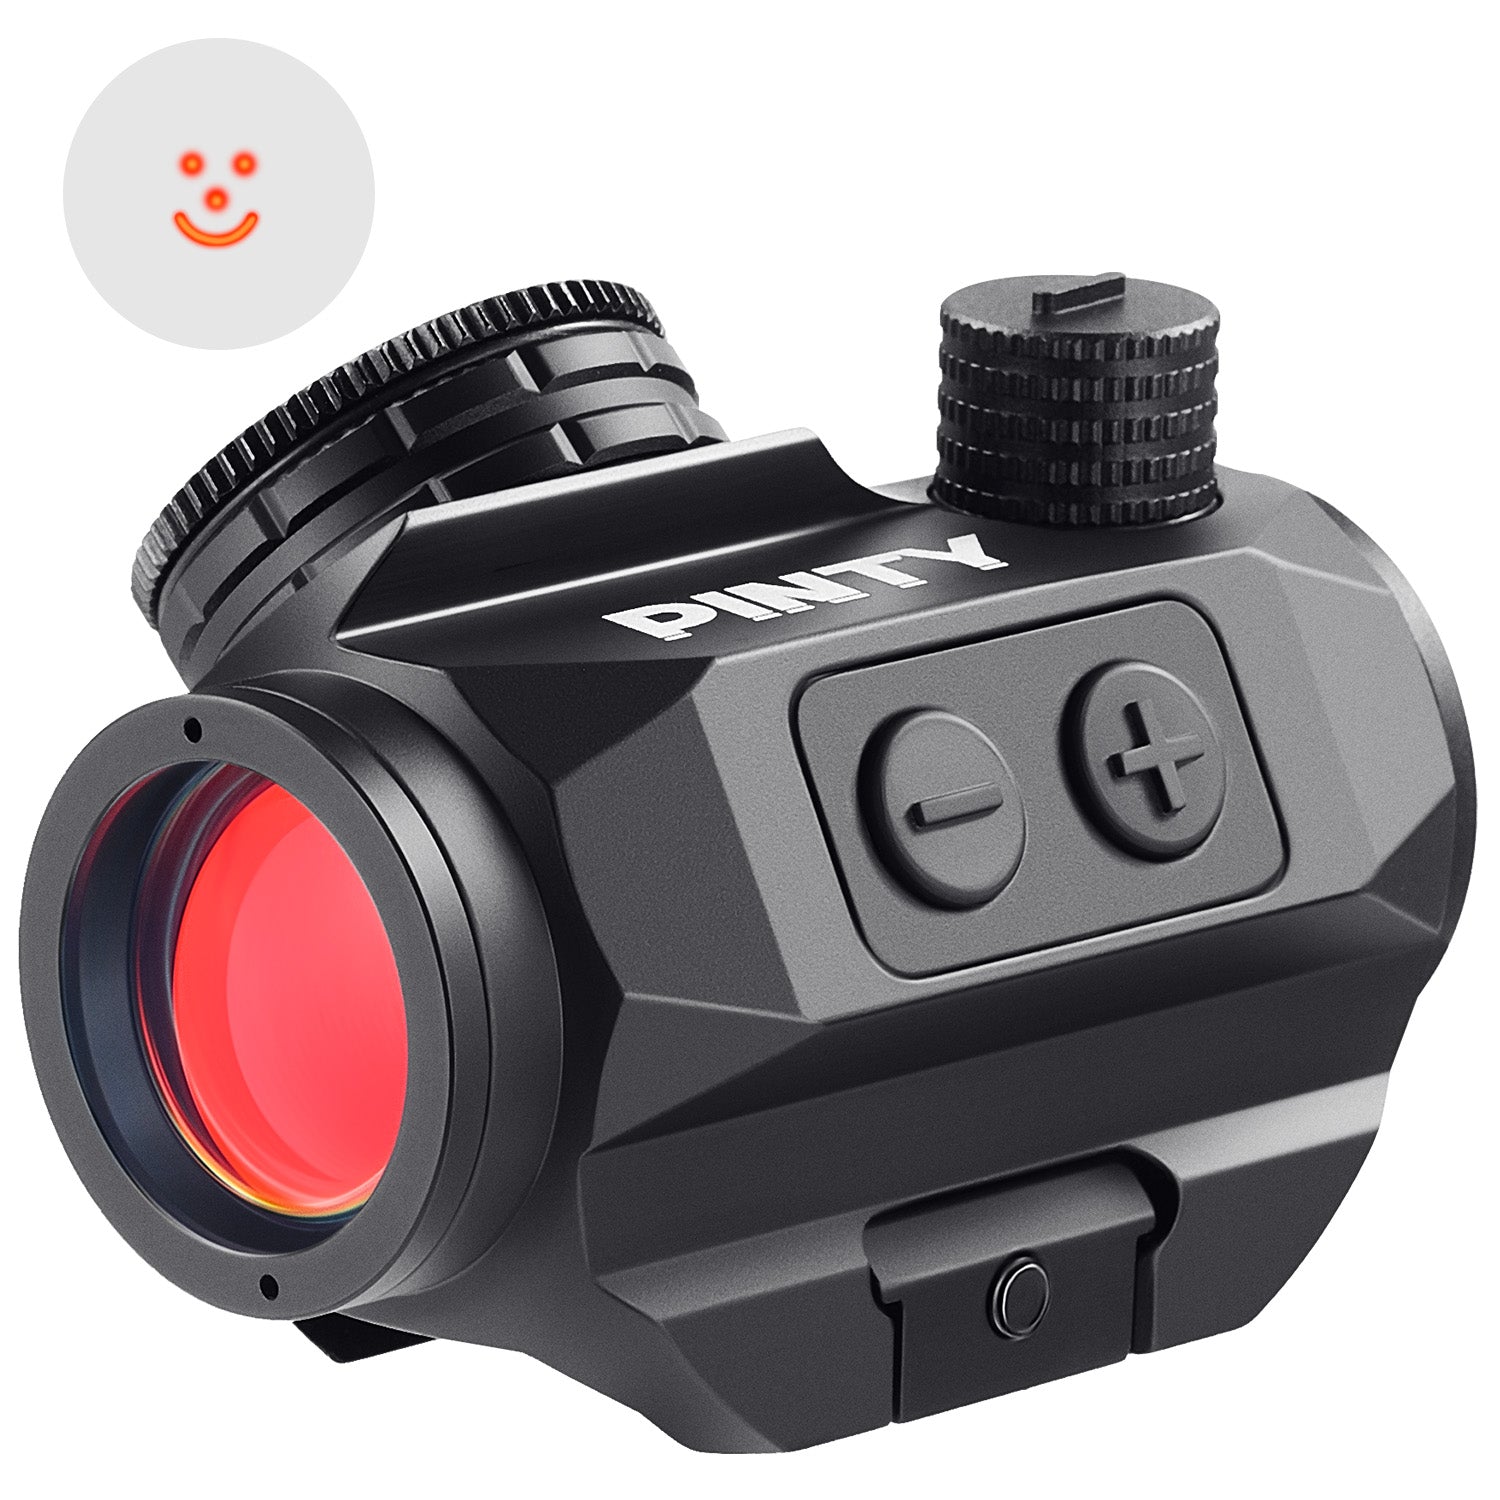 Pinty Scopes - 2MOA Red Dot Sight, Smiley Face Reticle